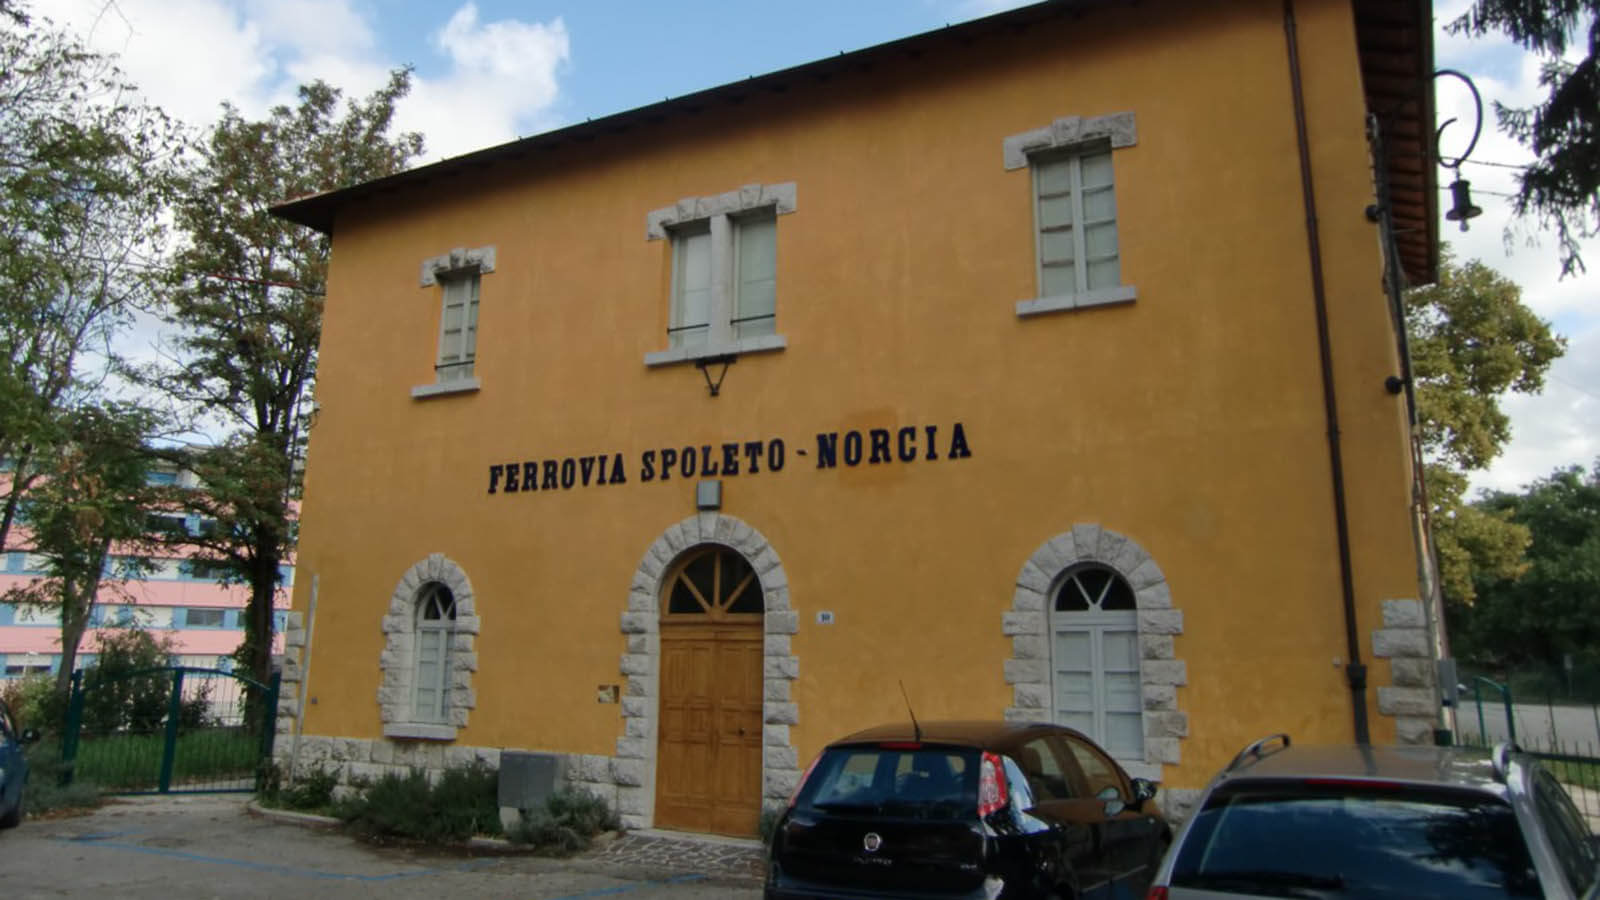 Museum of the Old Railway in Spoleto